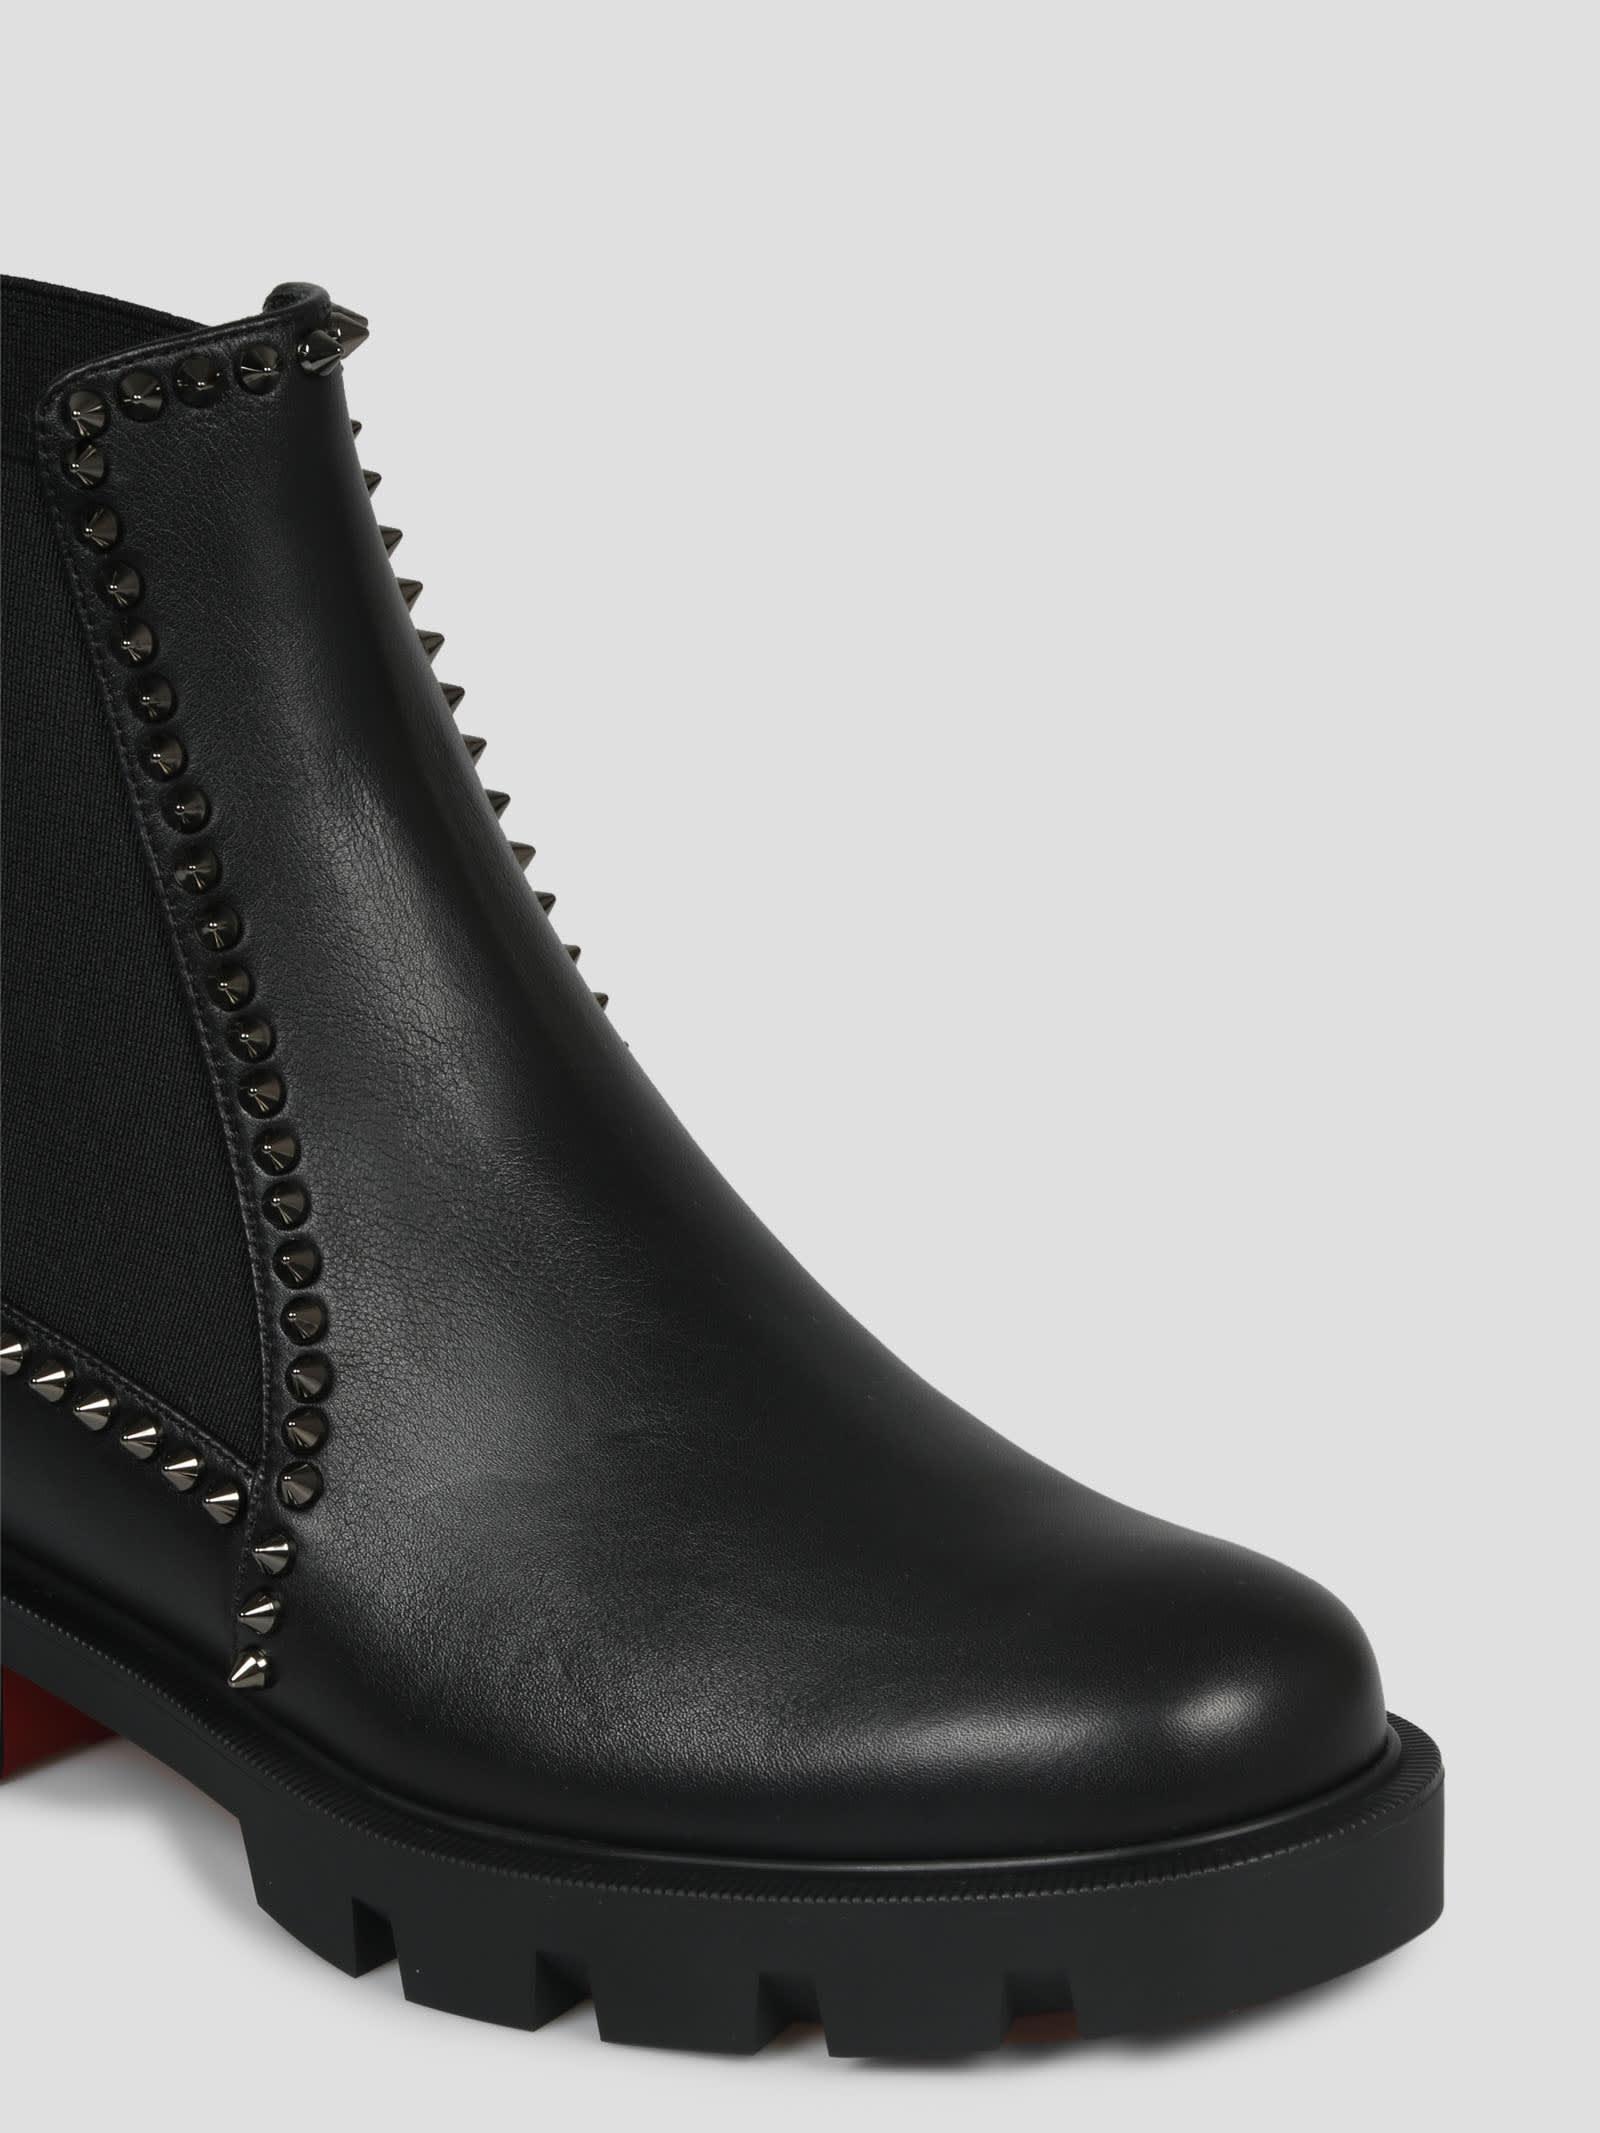 Christian Louboutin Out Lina Spike Lug Ankle Boot in Black | Lyst